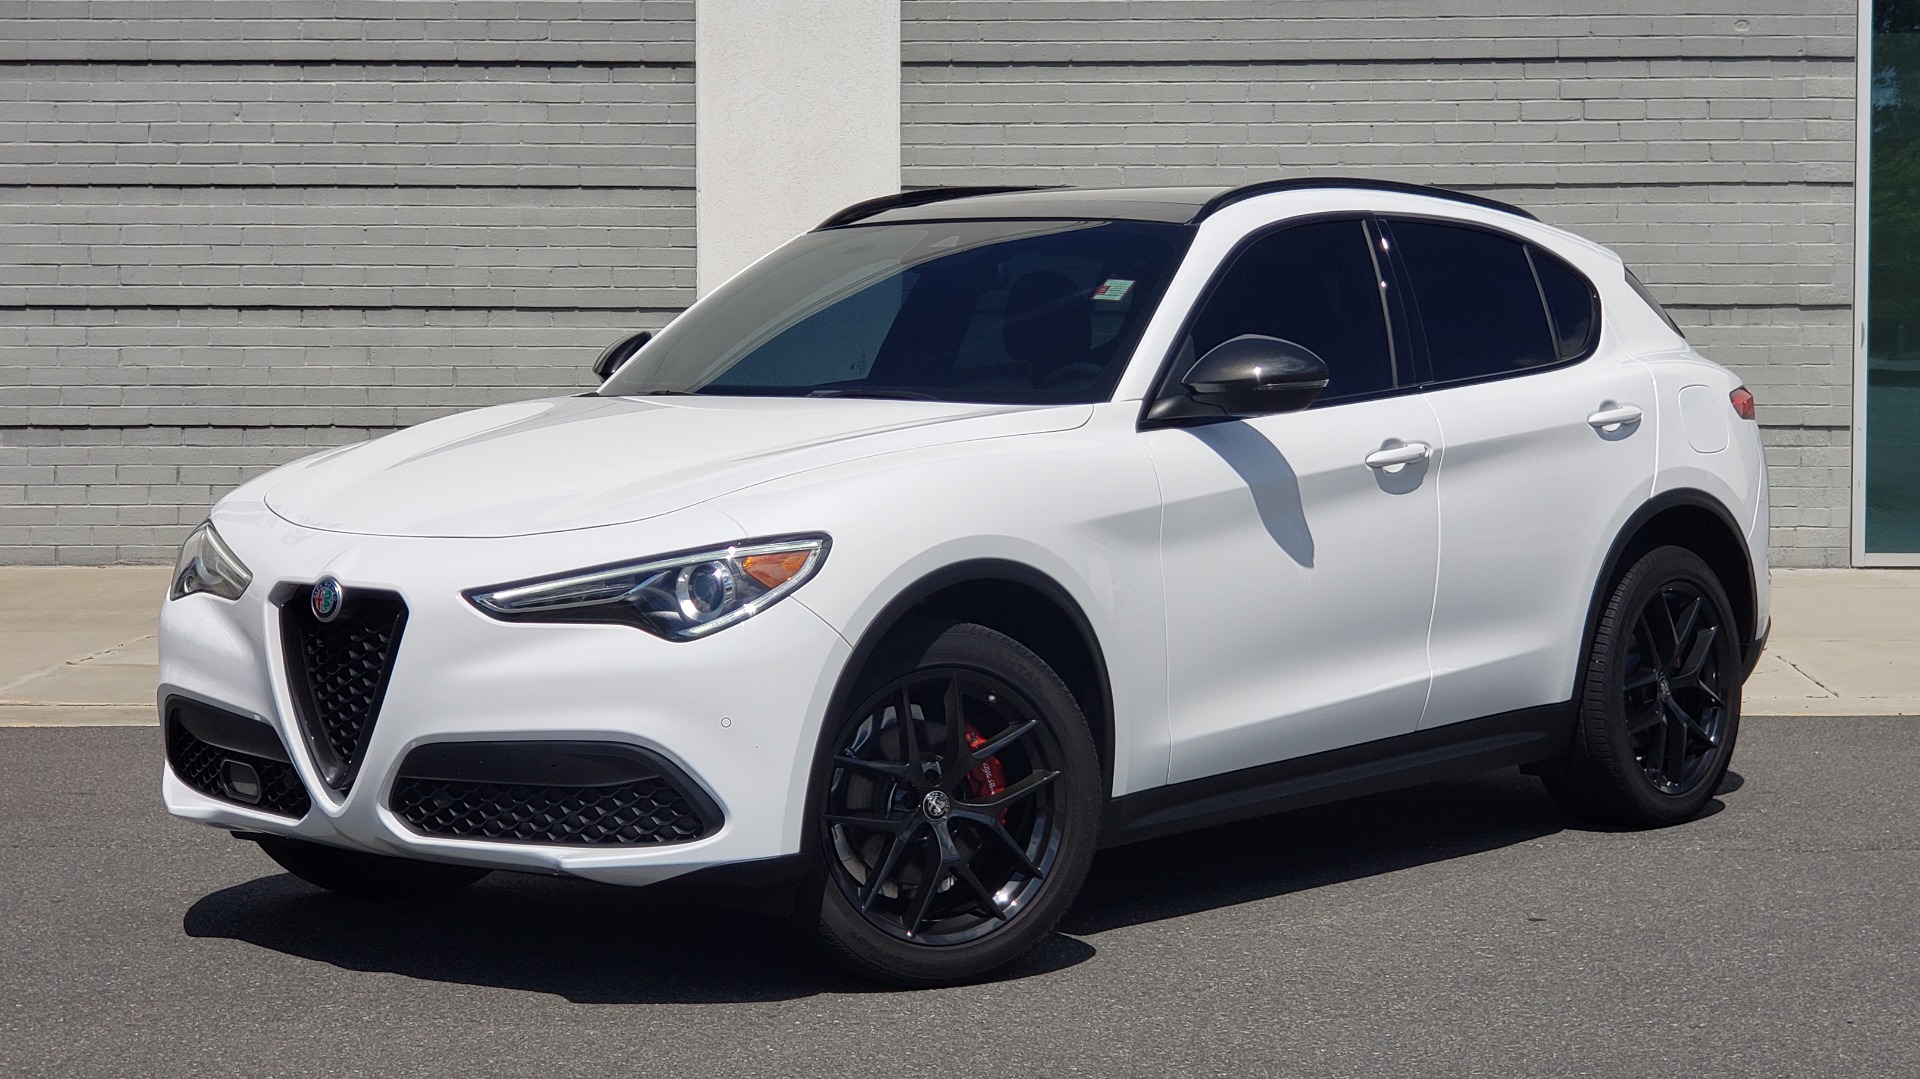 Used 2019 Alfa Romeo STELVIO TI SPORT AWD / 2.0L TURBO / 8-SPD AUTO / DRVR ASST / REARVIEW for sale Sold at Formula Imports in Charlotte NC 28227 1